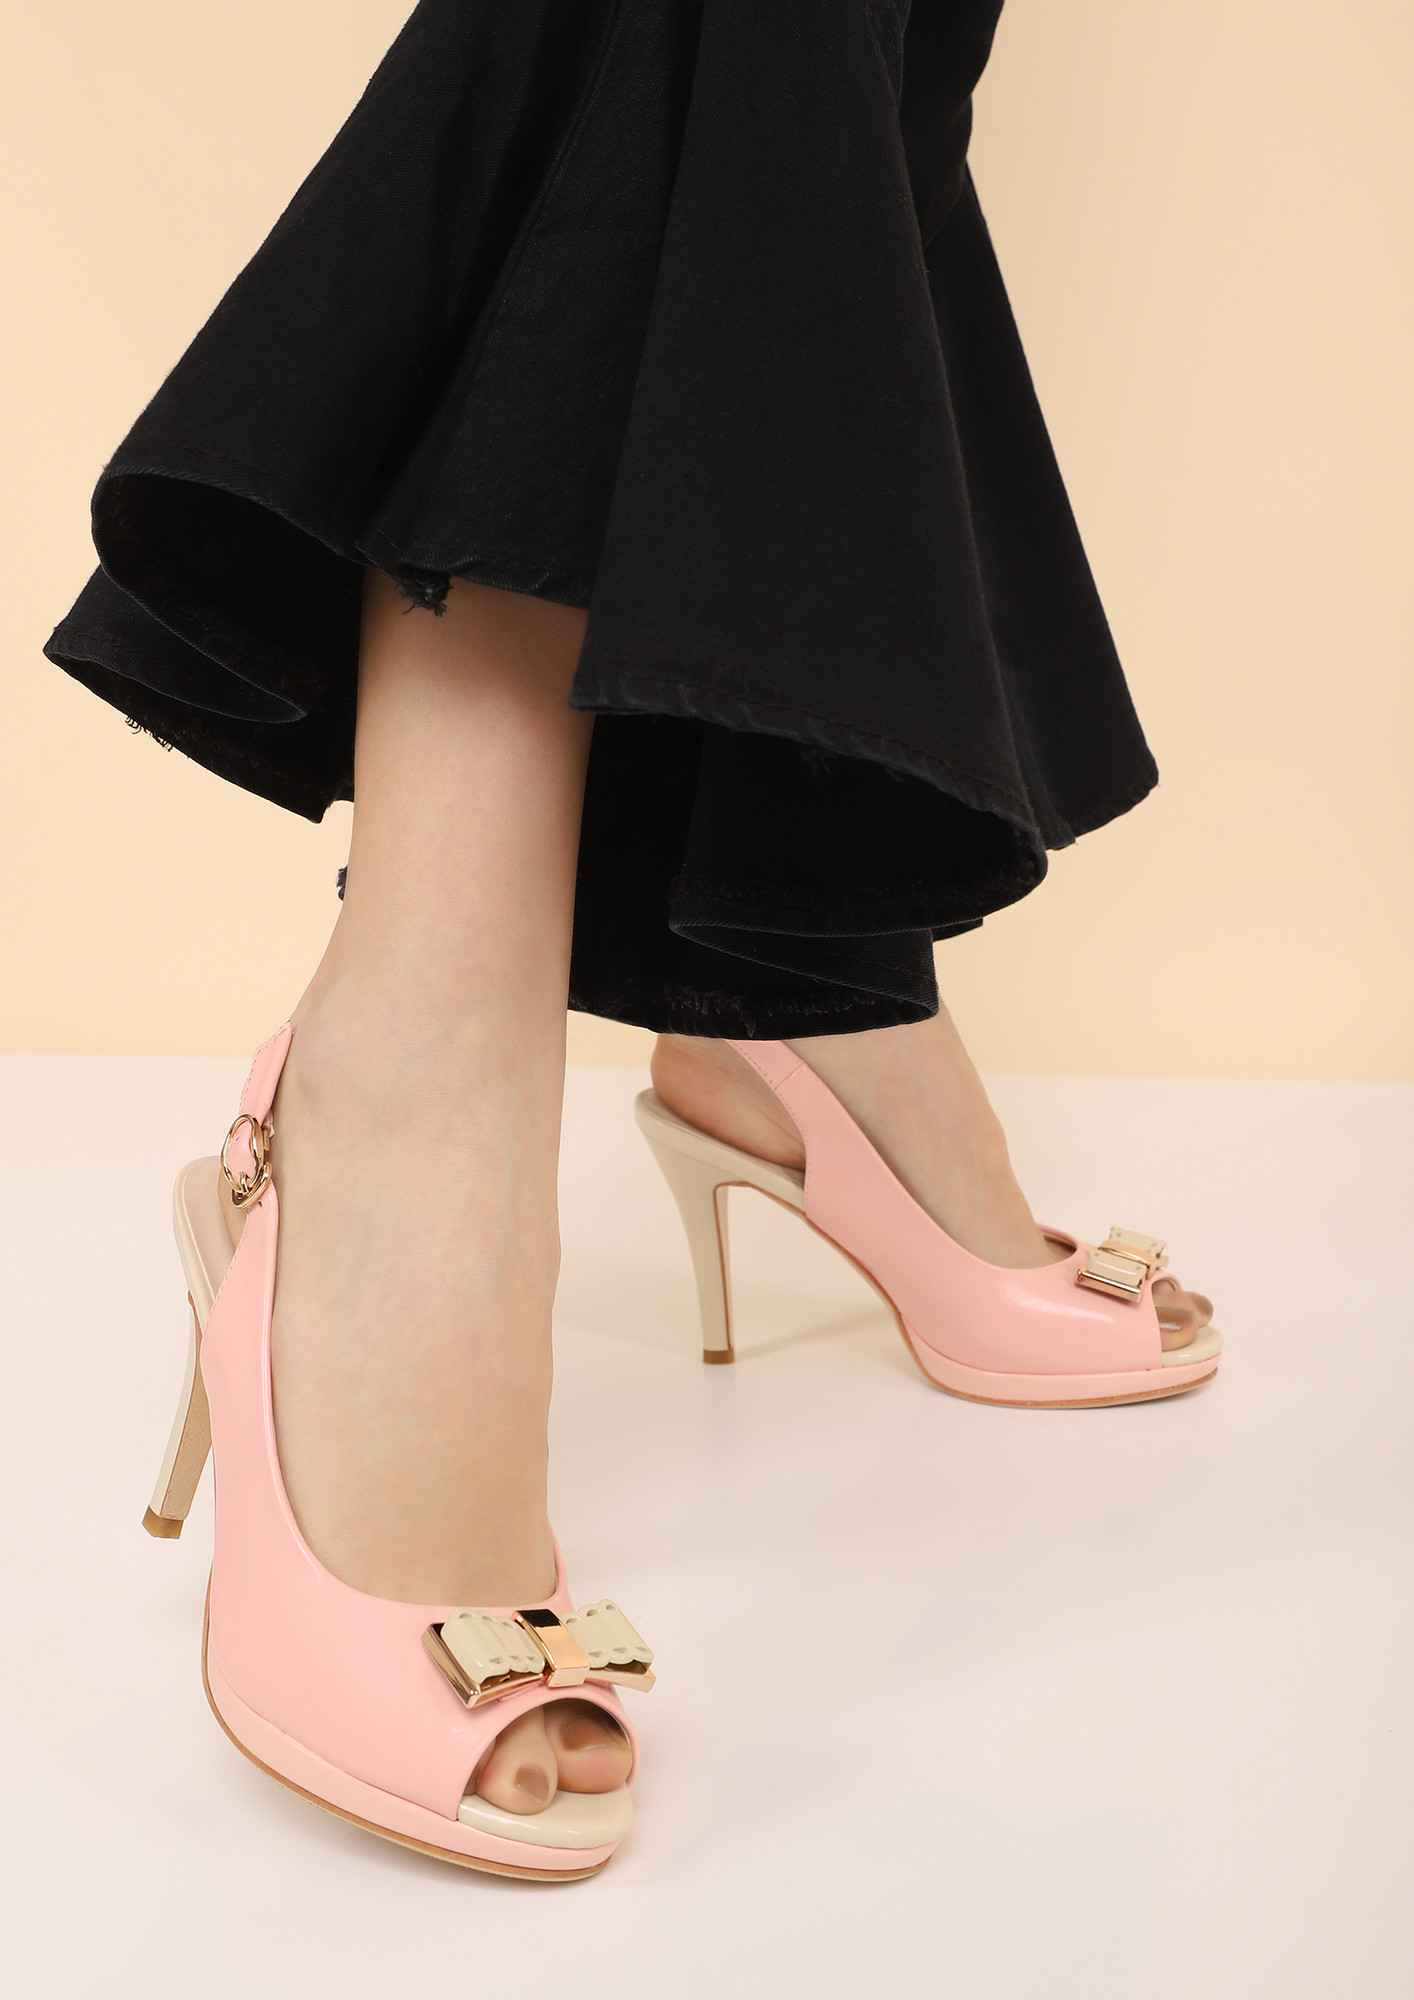 BOWING OUT PINK PEEP-TOE HEELS